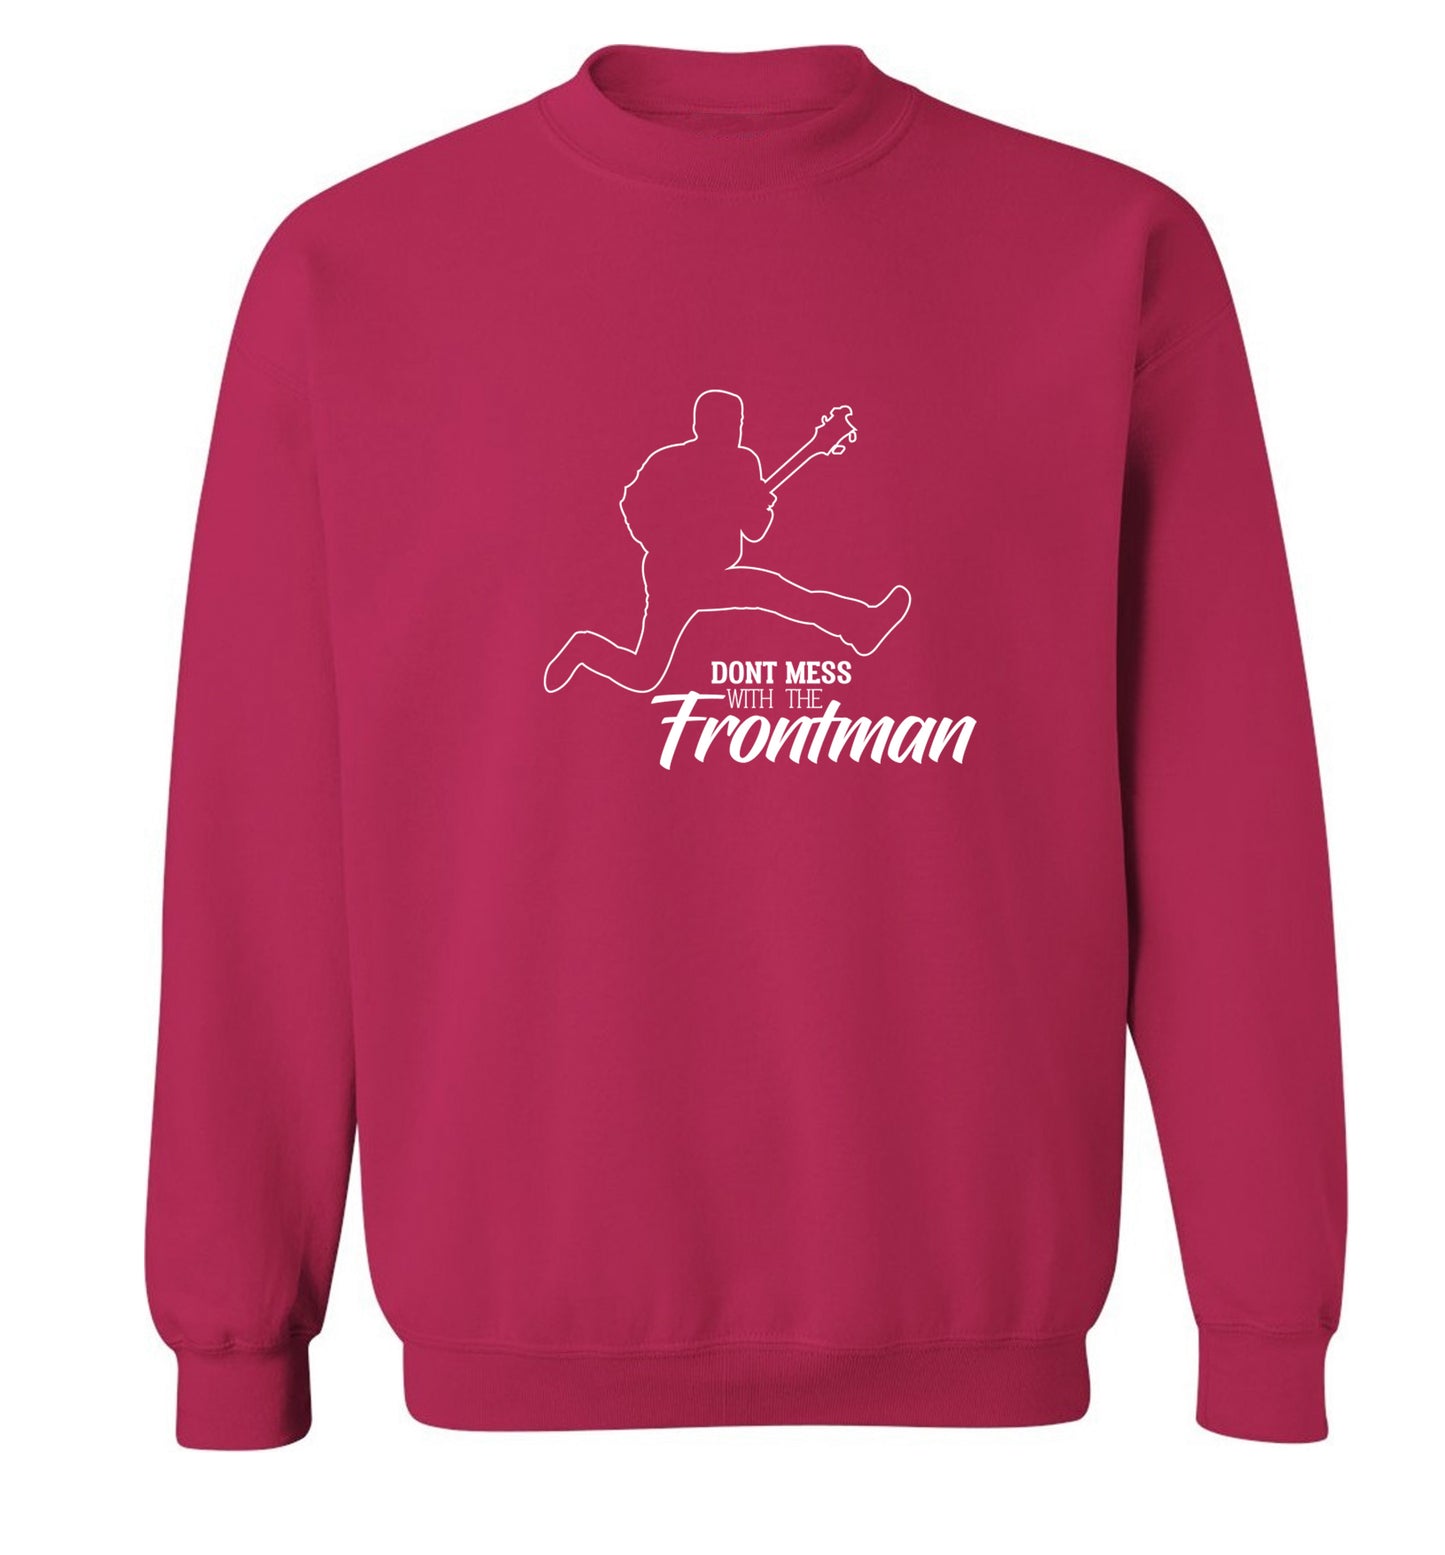 Don't mess with the frontman Adult's unisex pink Sweater 2XL